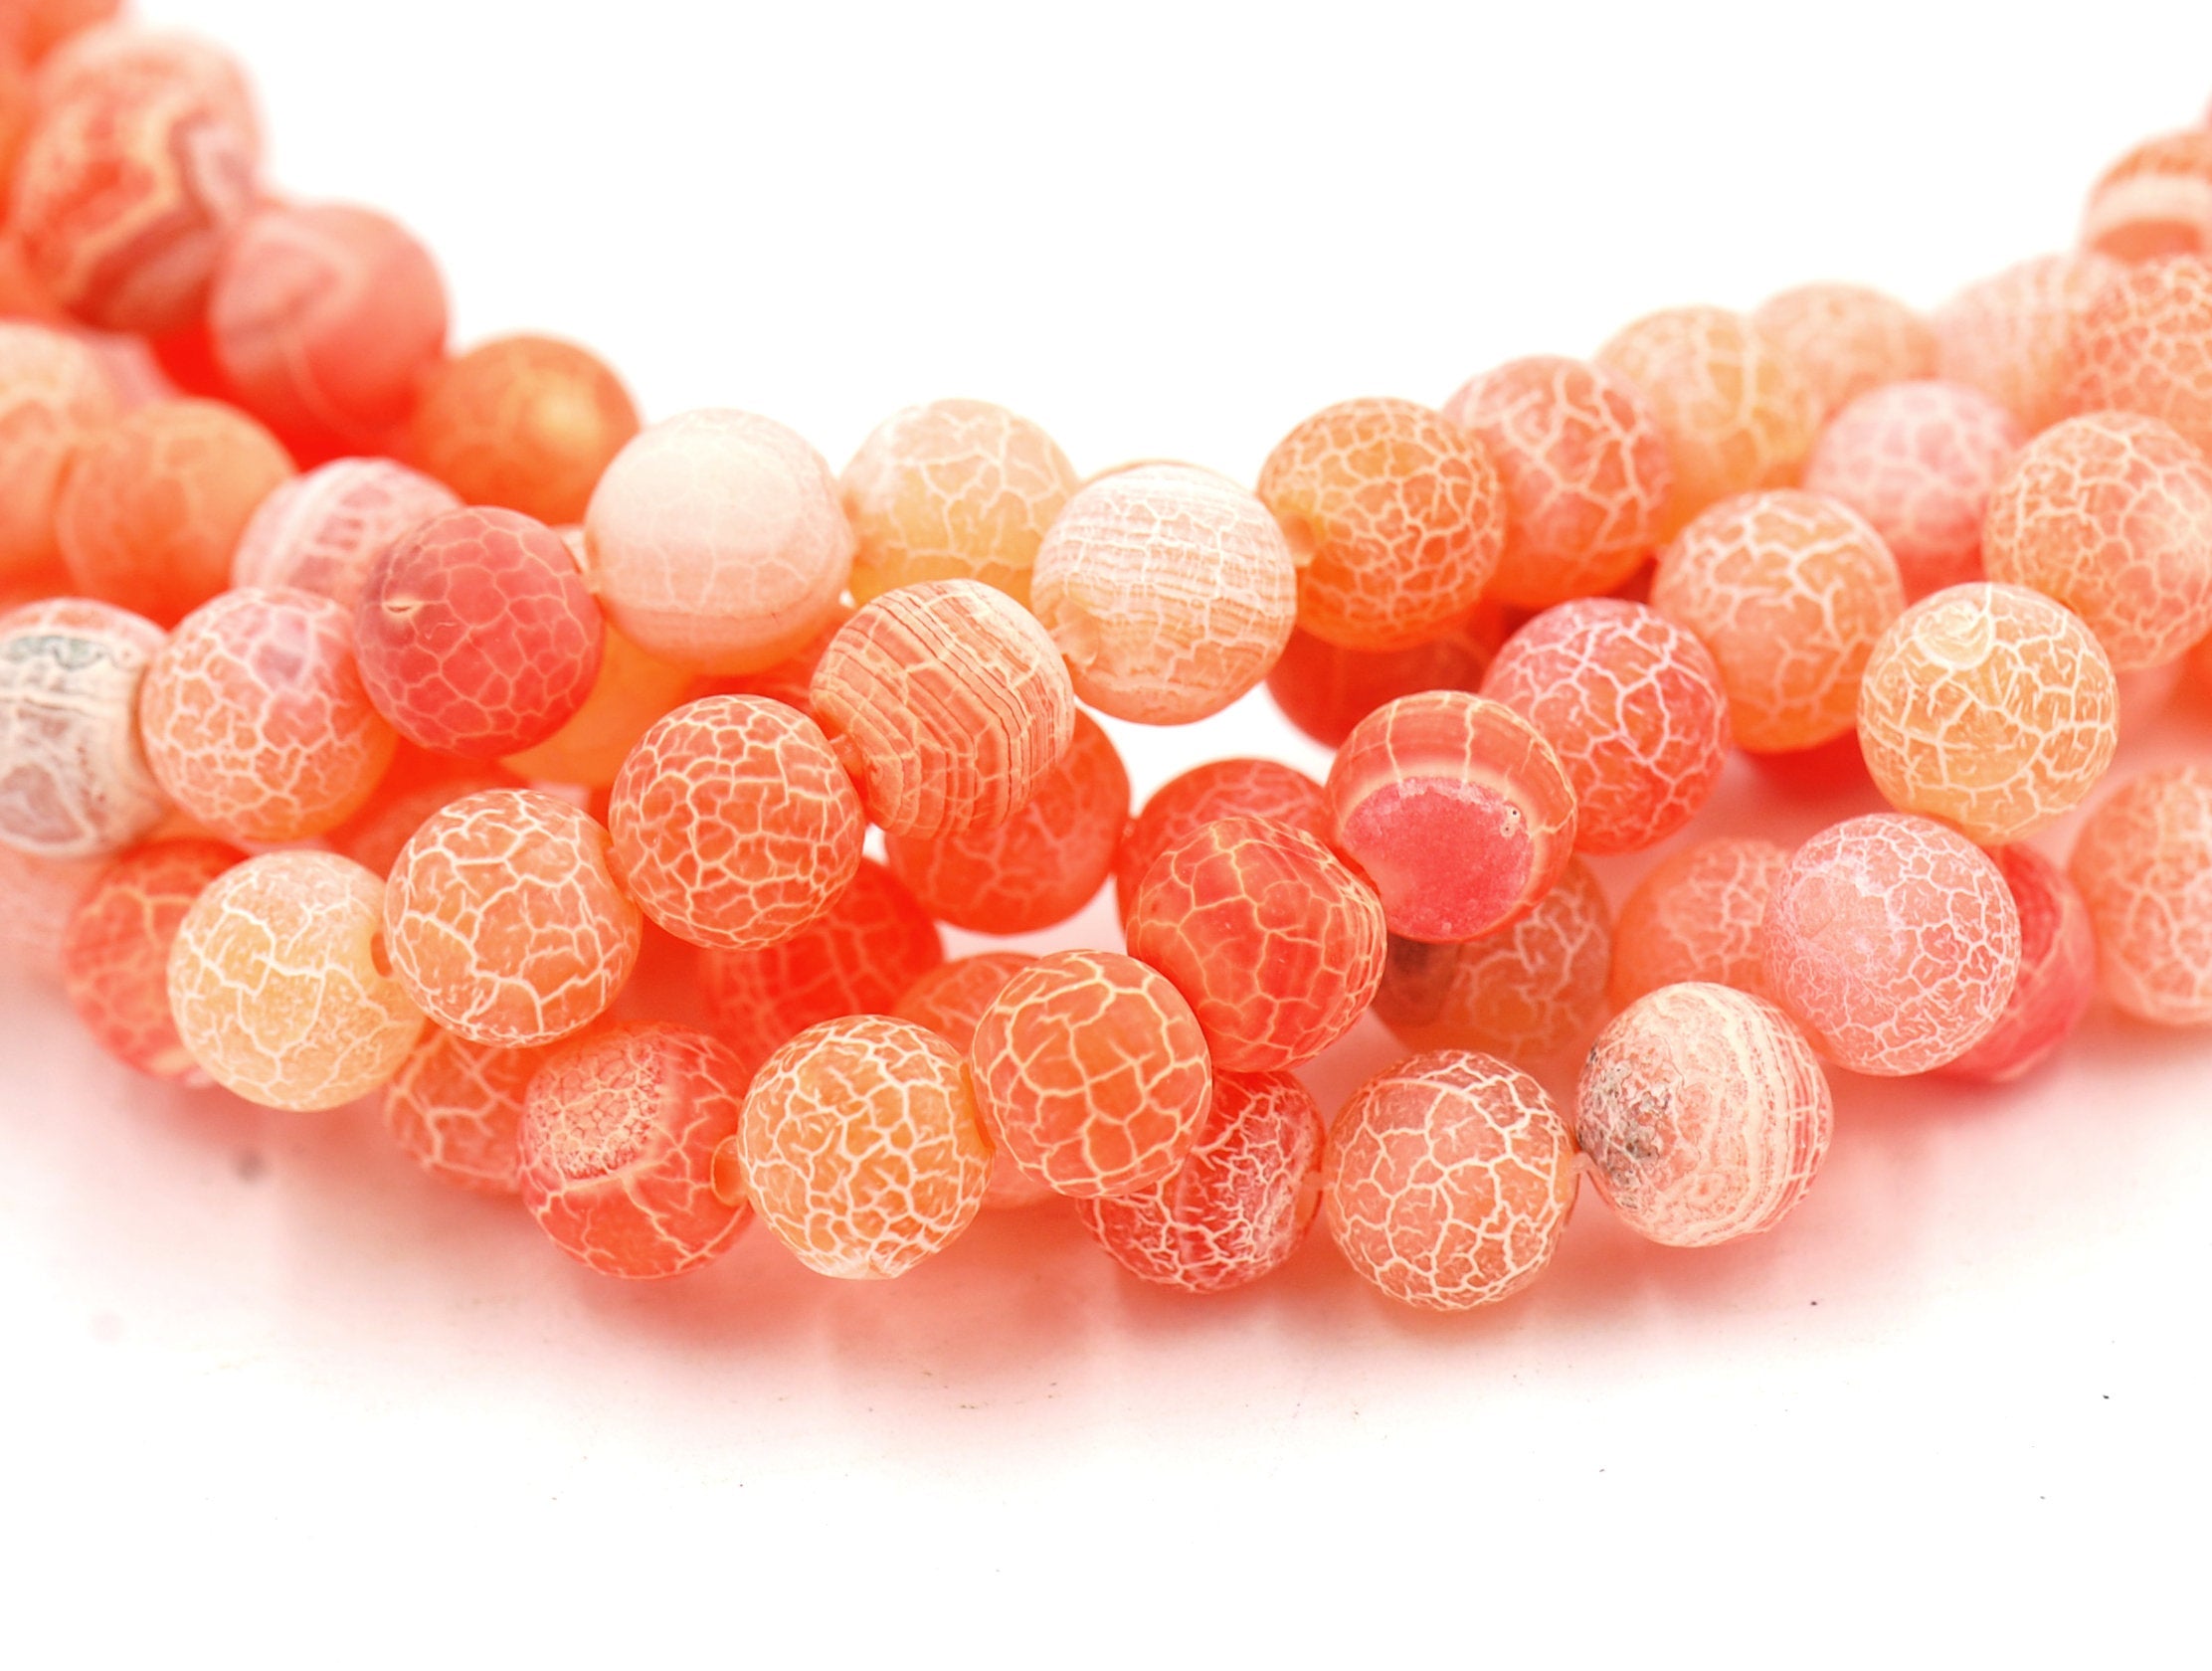 8mm Frosted Agate Round Beads in Orange Coral  -14.25 inch strand